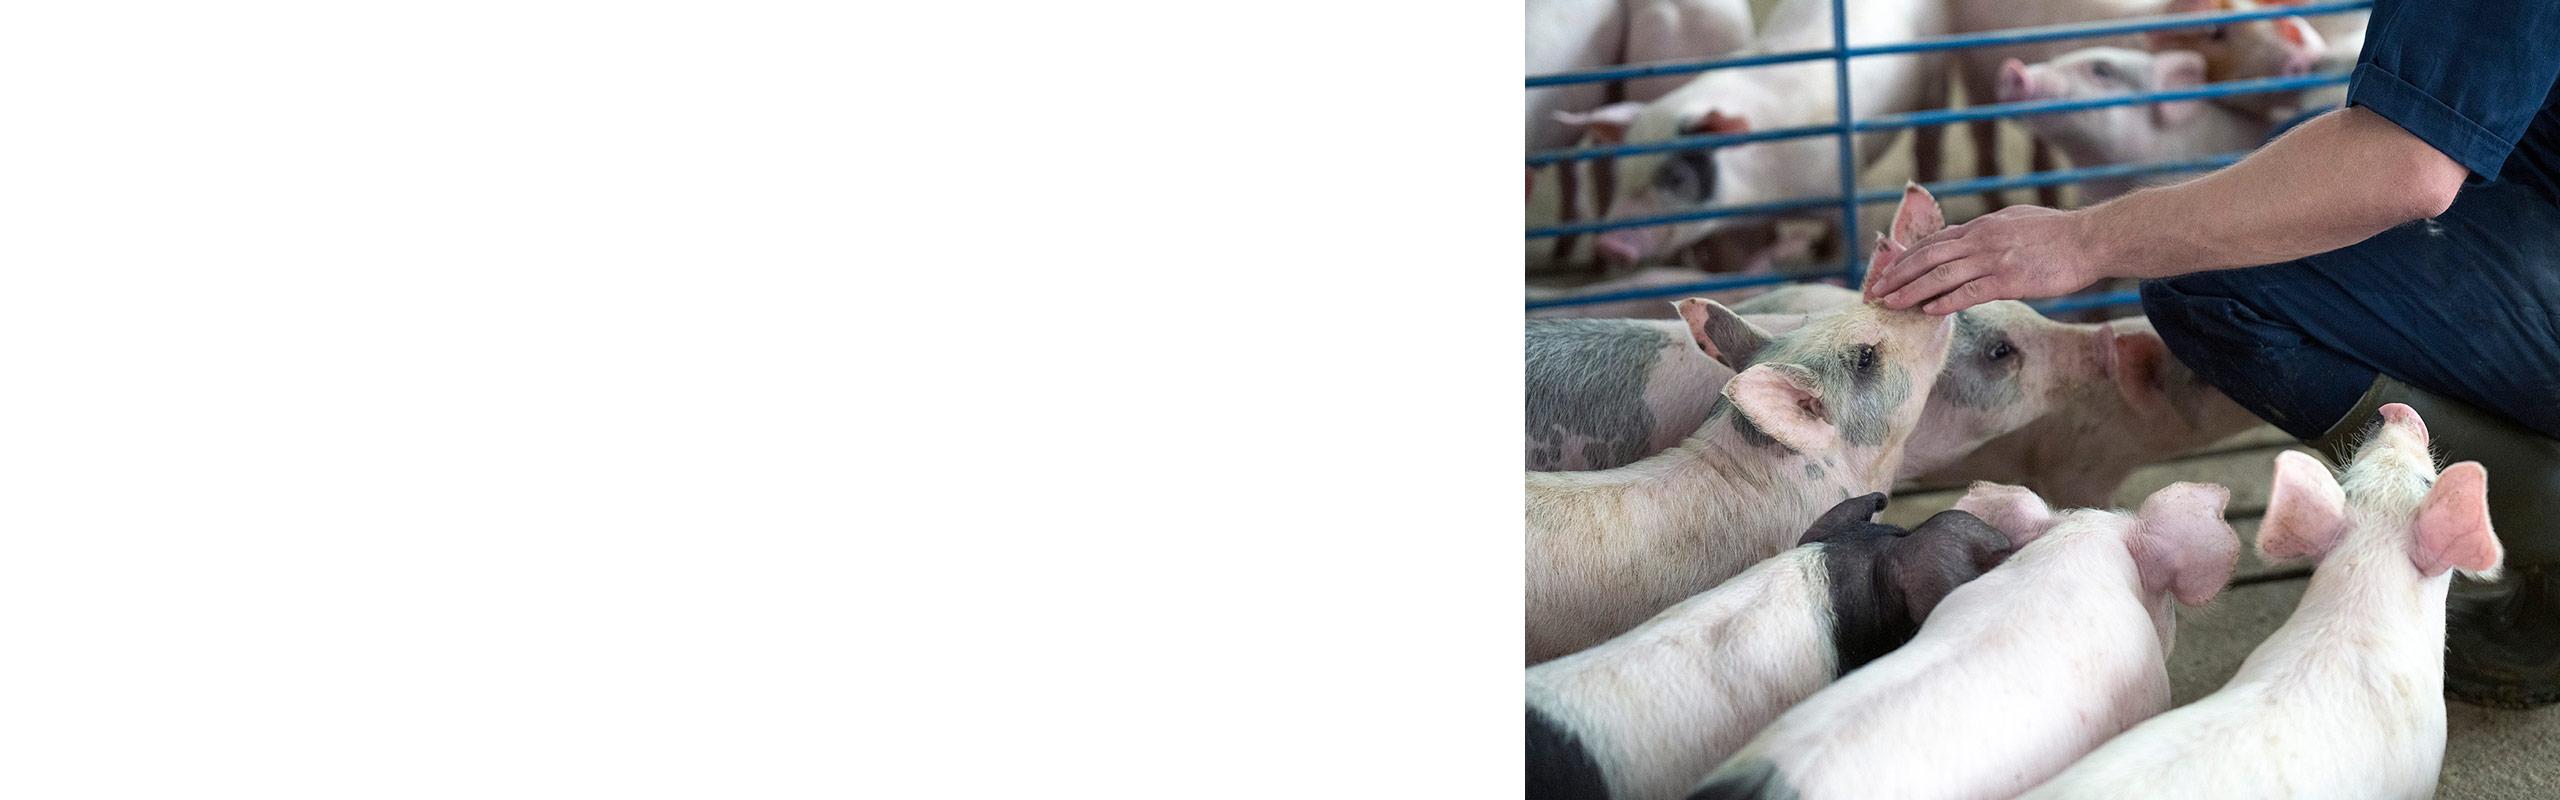 production staff member petting piglets in a barn